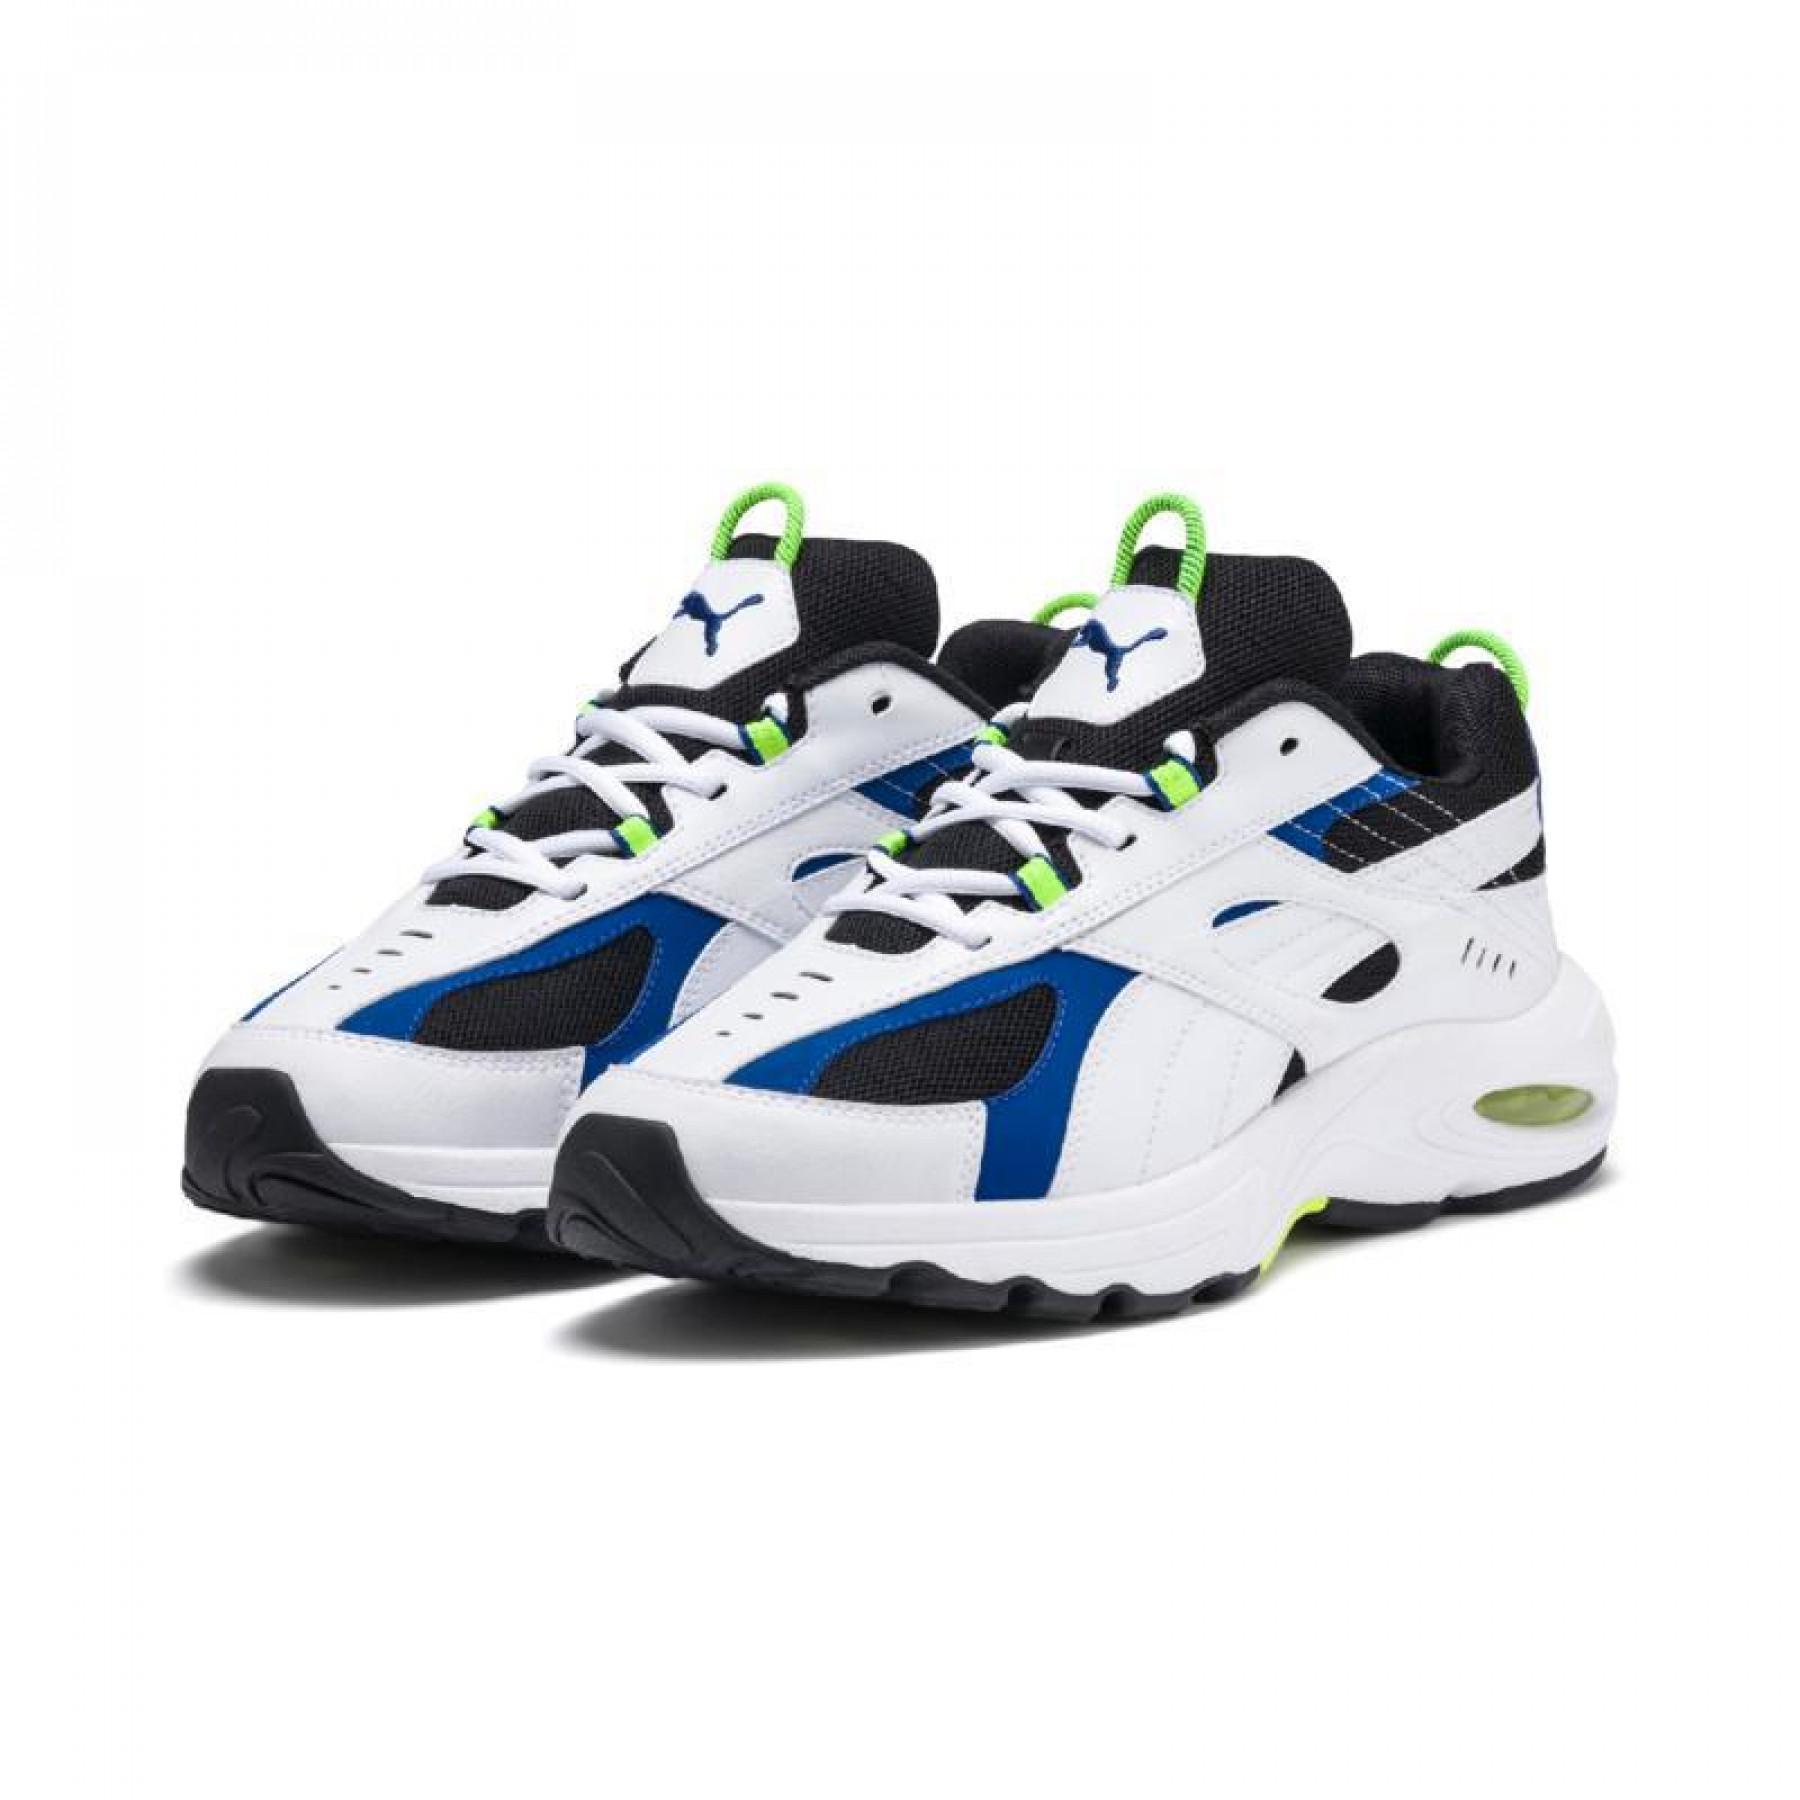 Sneakers Puma Cell speed